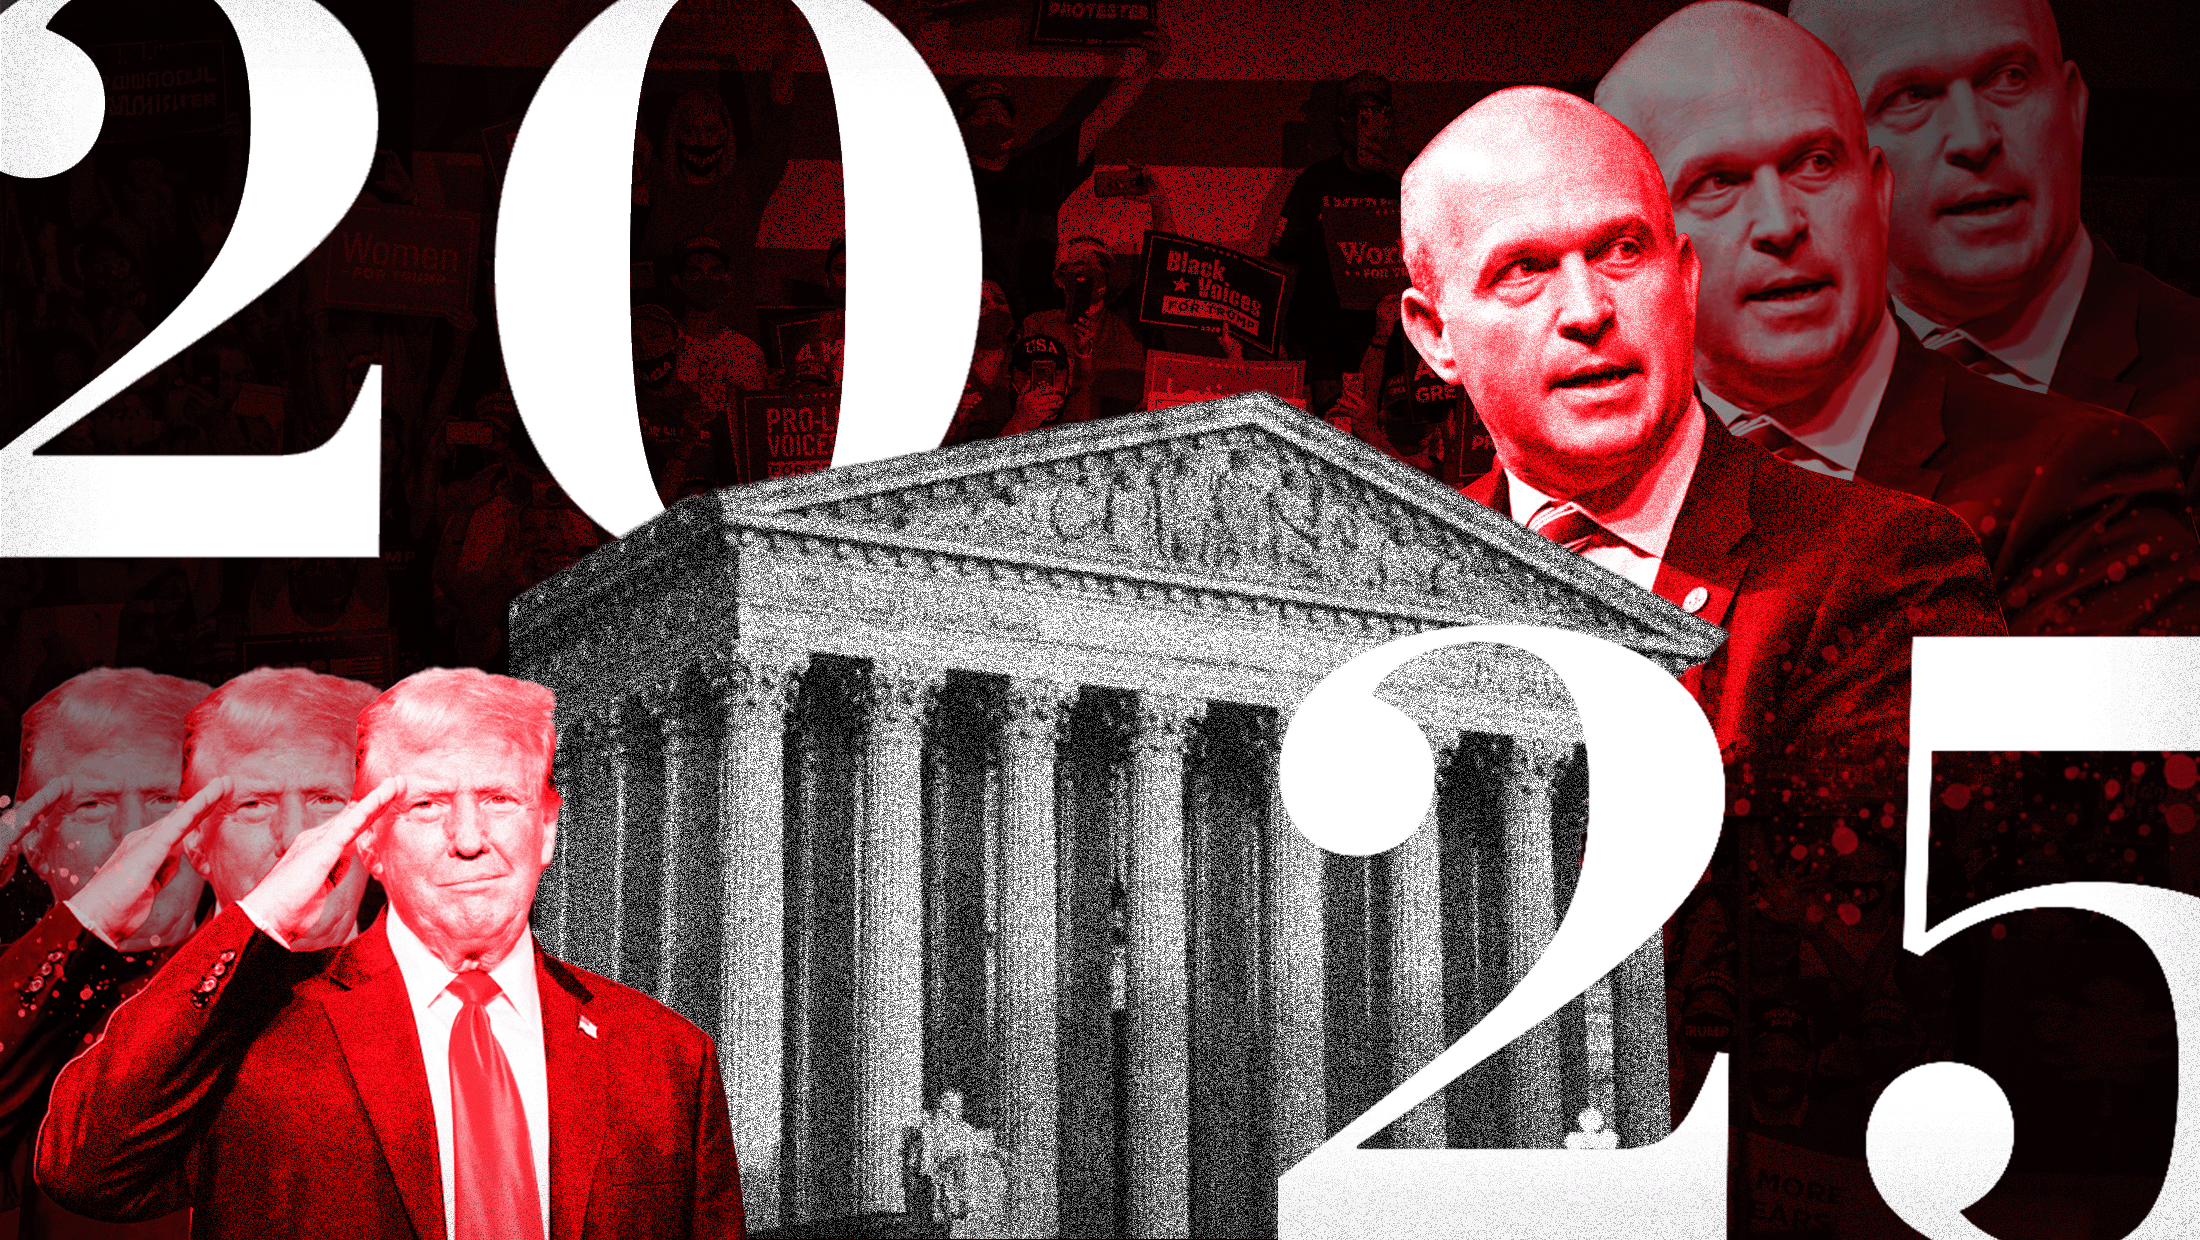 Red, black and white colors with the U.S. Supreme Court in the middle, a red-toned image of Donald Trump saluting, Kevin Roberts, the president of the Heritage Foundation and 2025 written in big white characters.